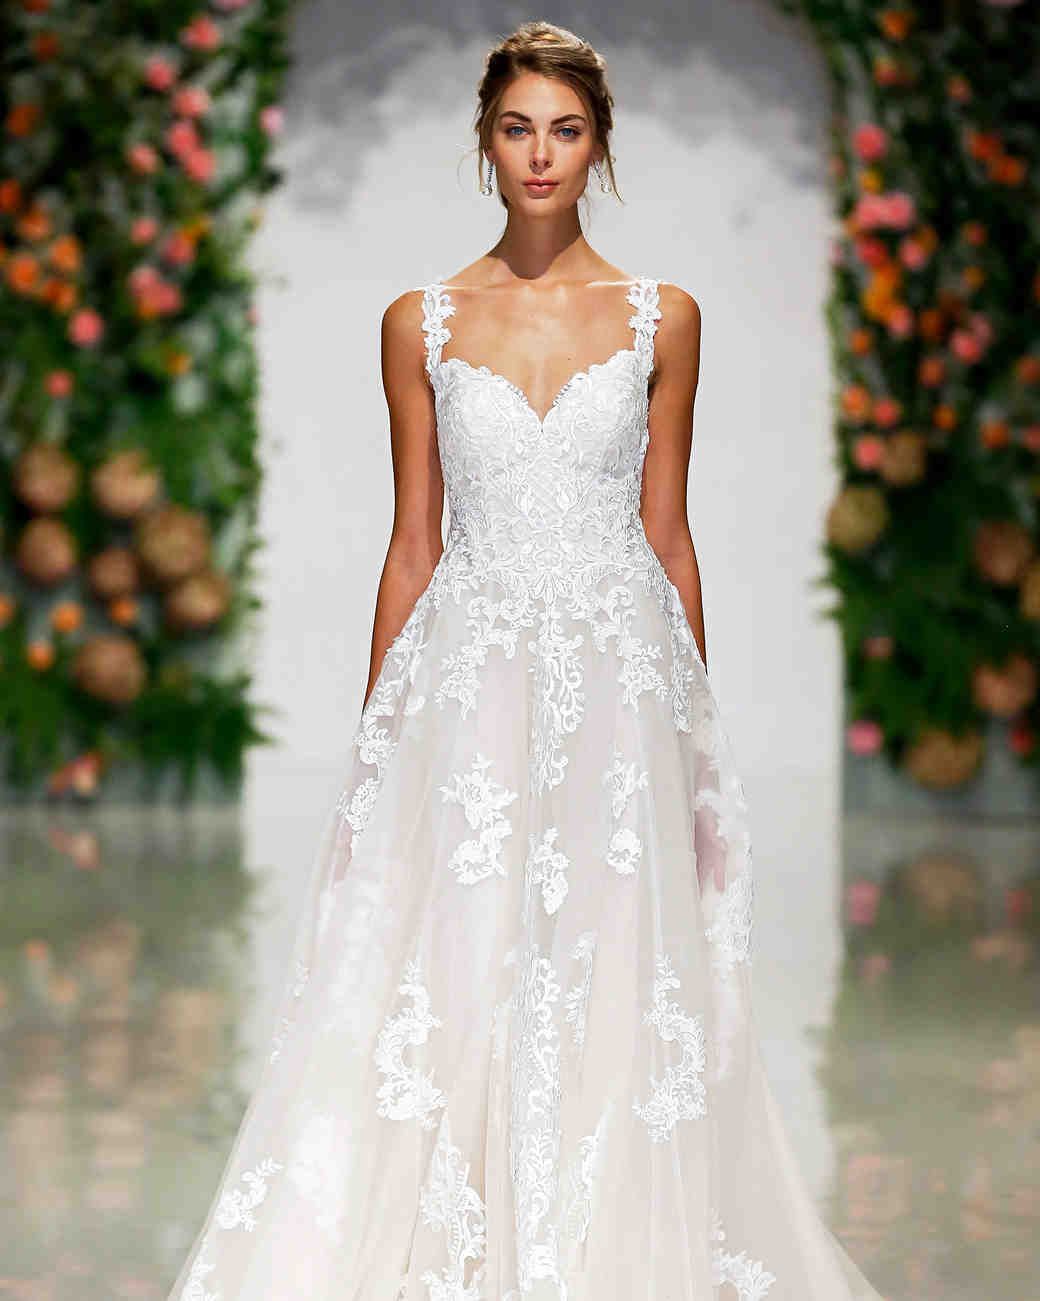 Morilee by Madeline Gardner Fall 2019 Wedding Dress Collection | Martha